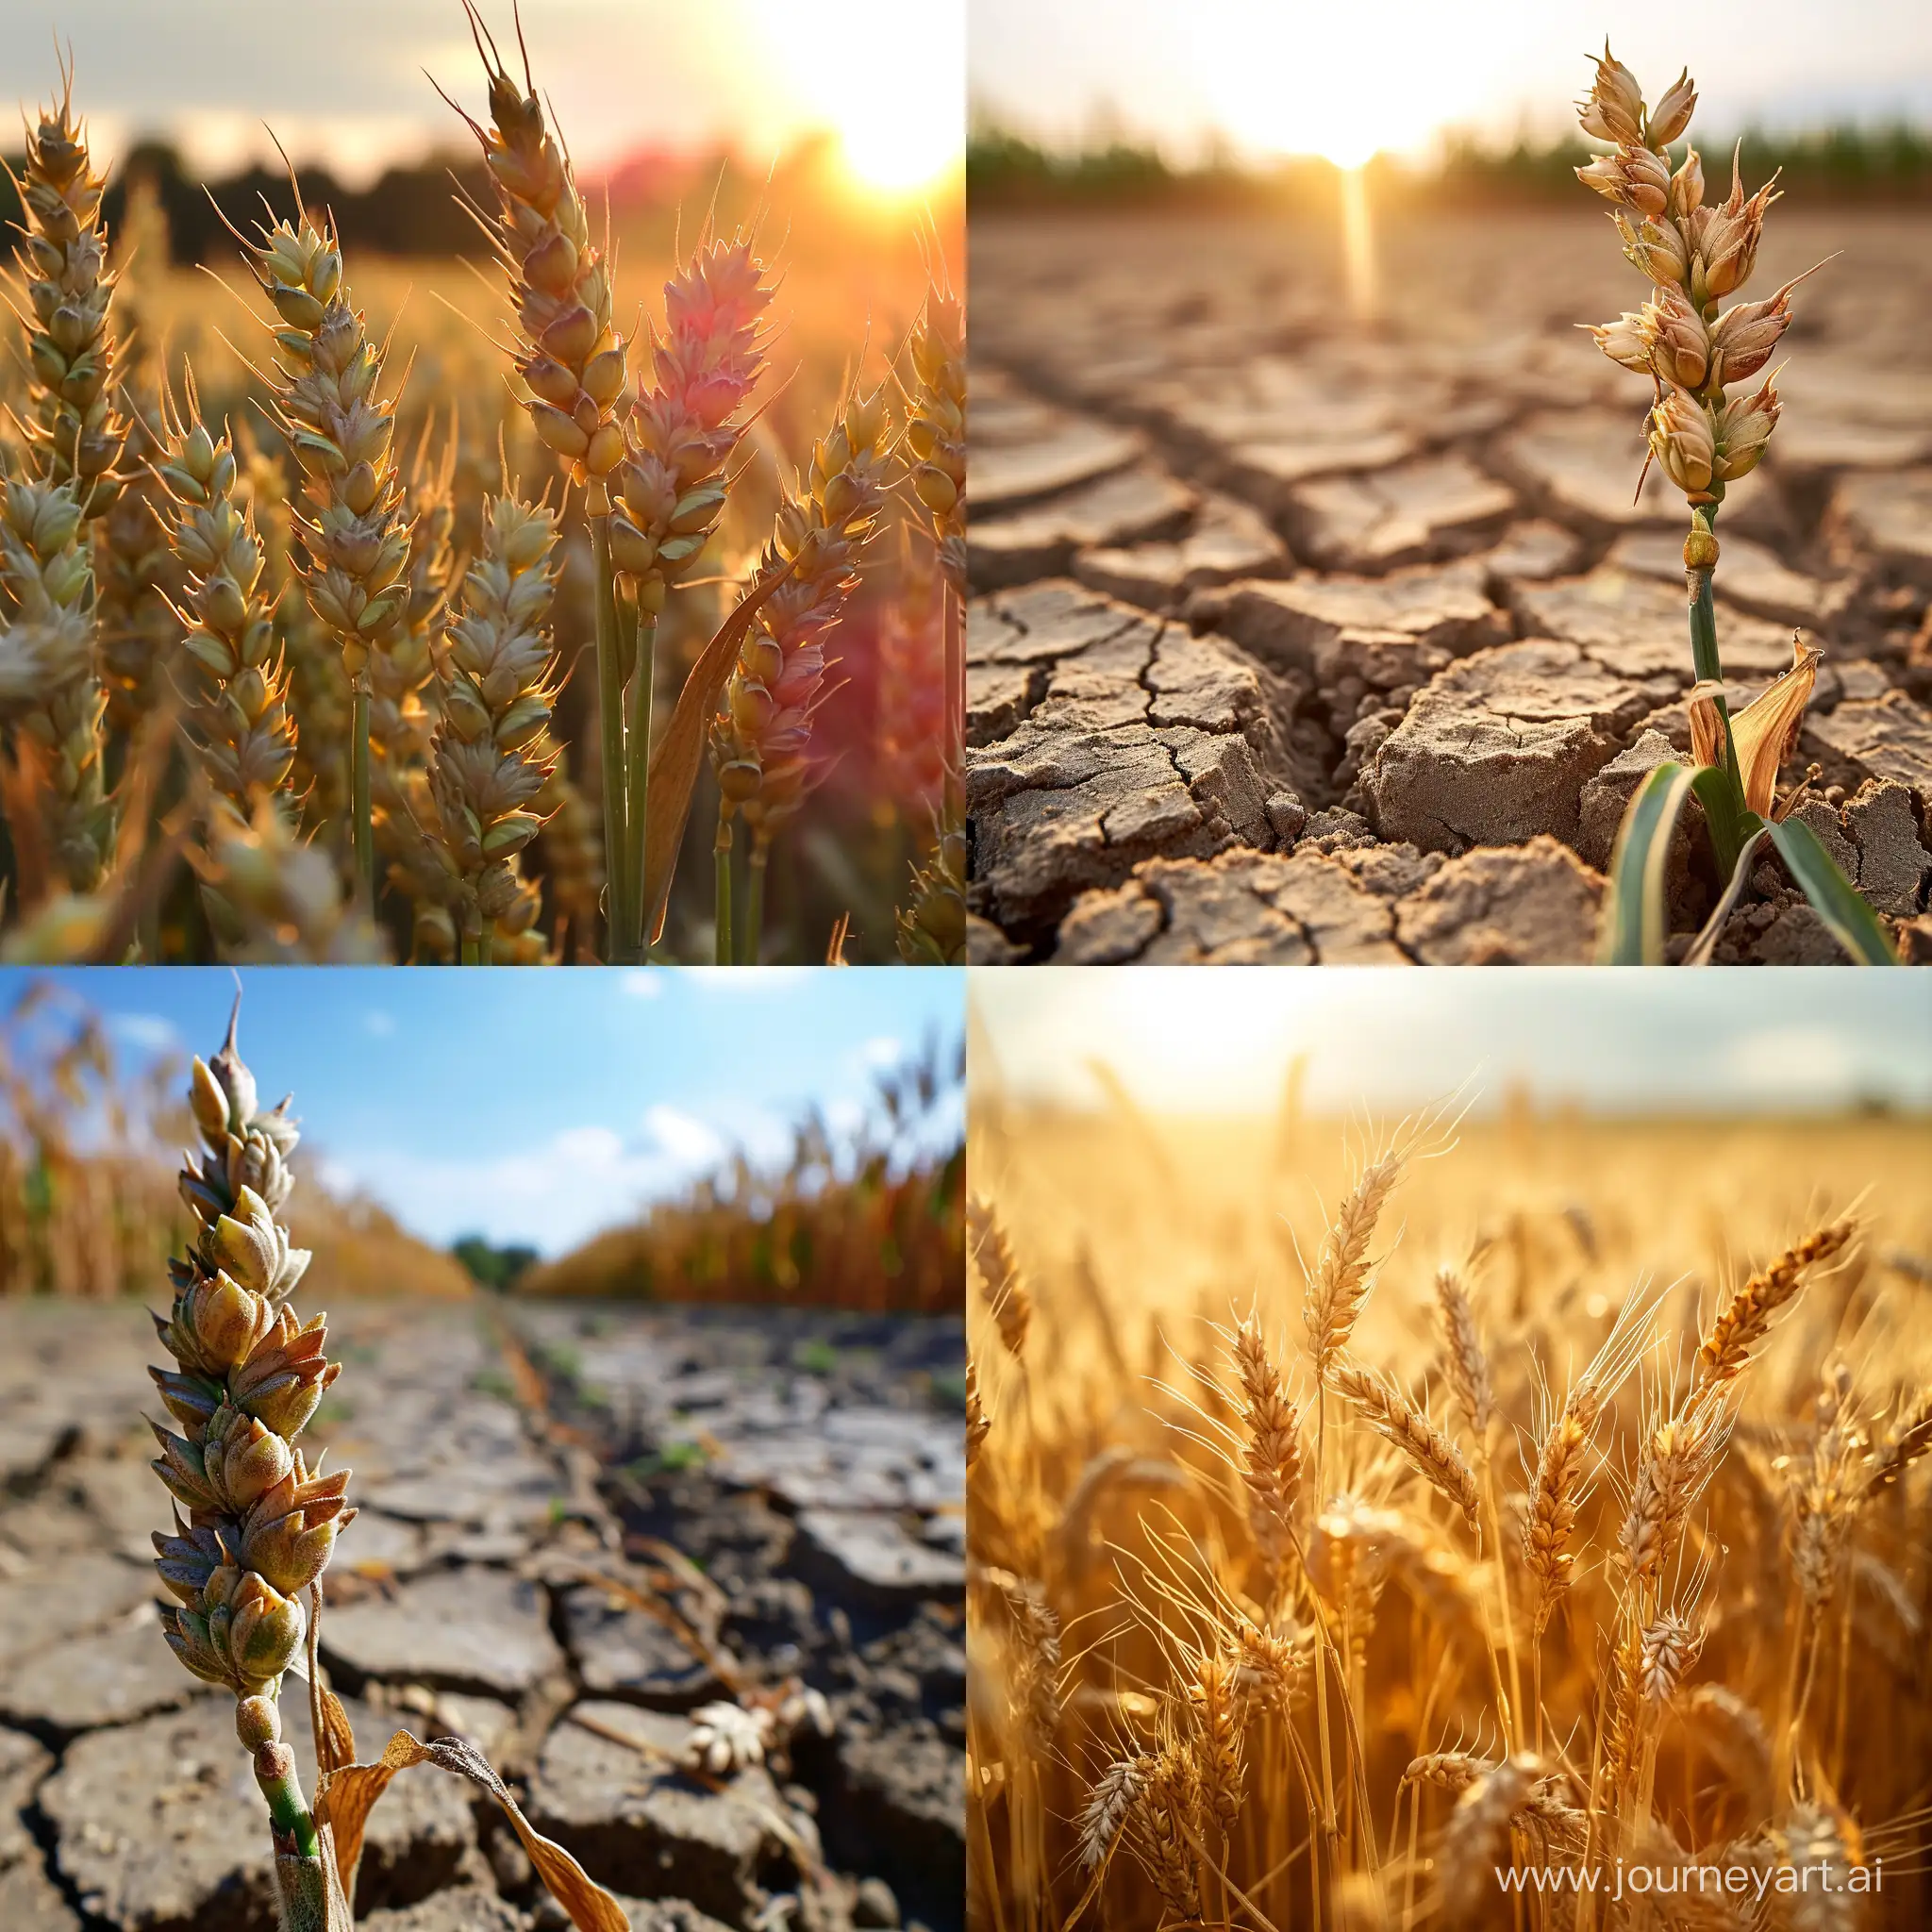 Future-Impact-of-Climate-Change-on-Wheat-Crops